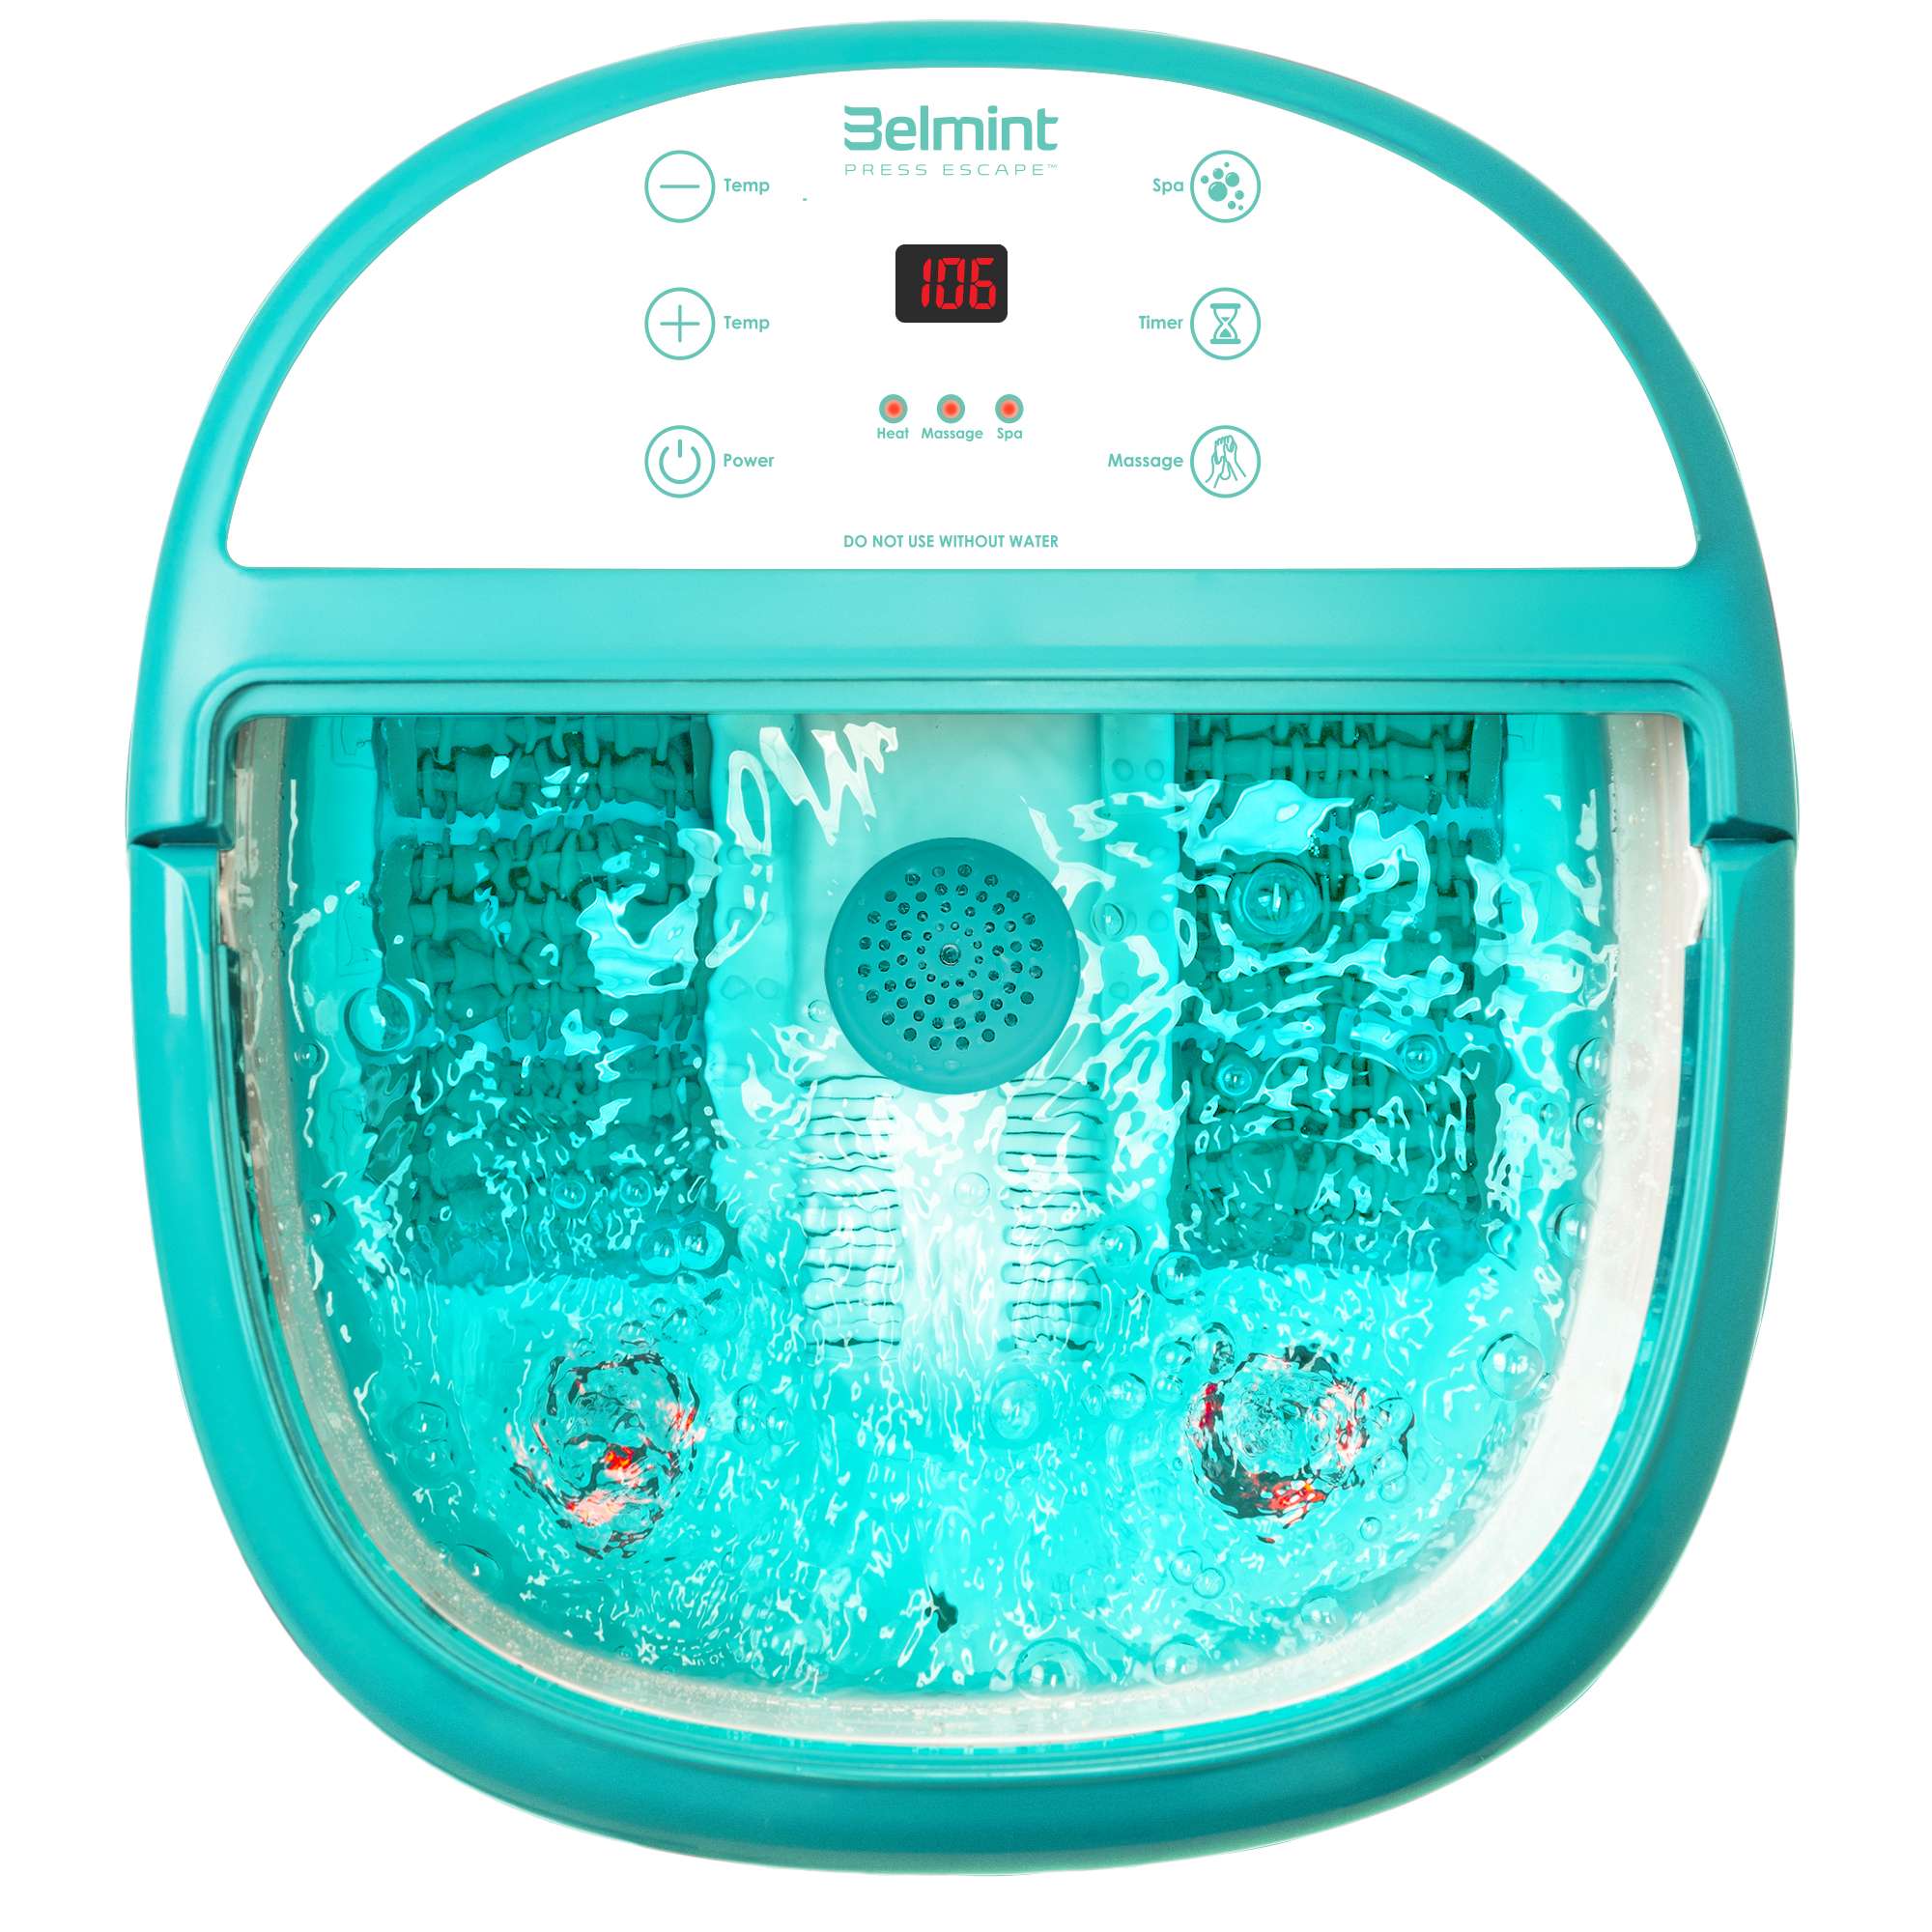 Belmint Foot Spa Bath Massager with Heat, Foot Soaking Tub Features ...